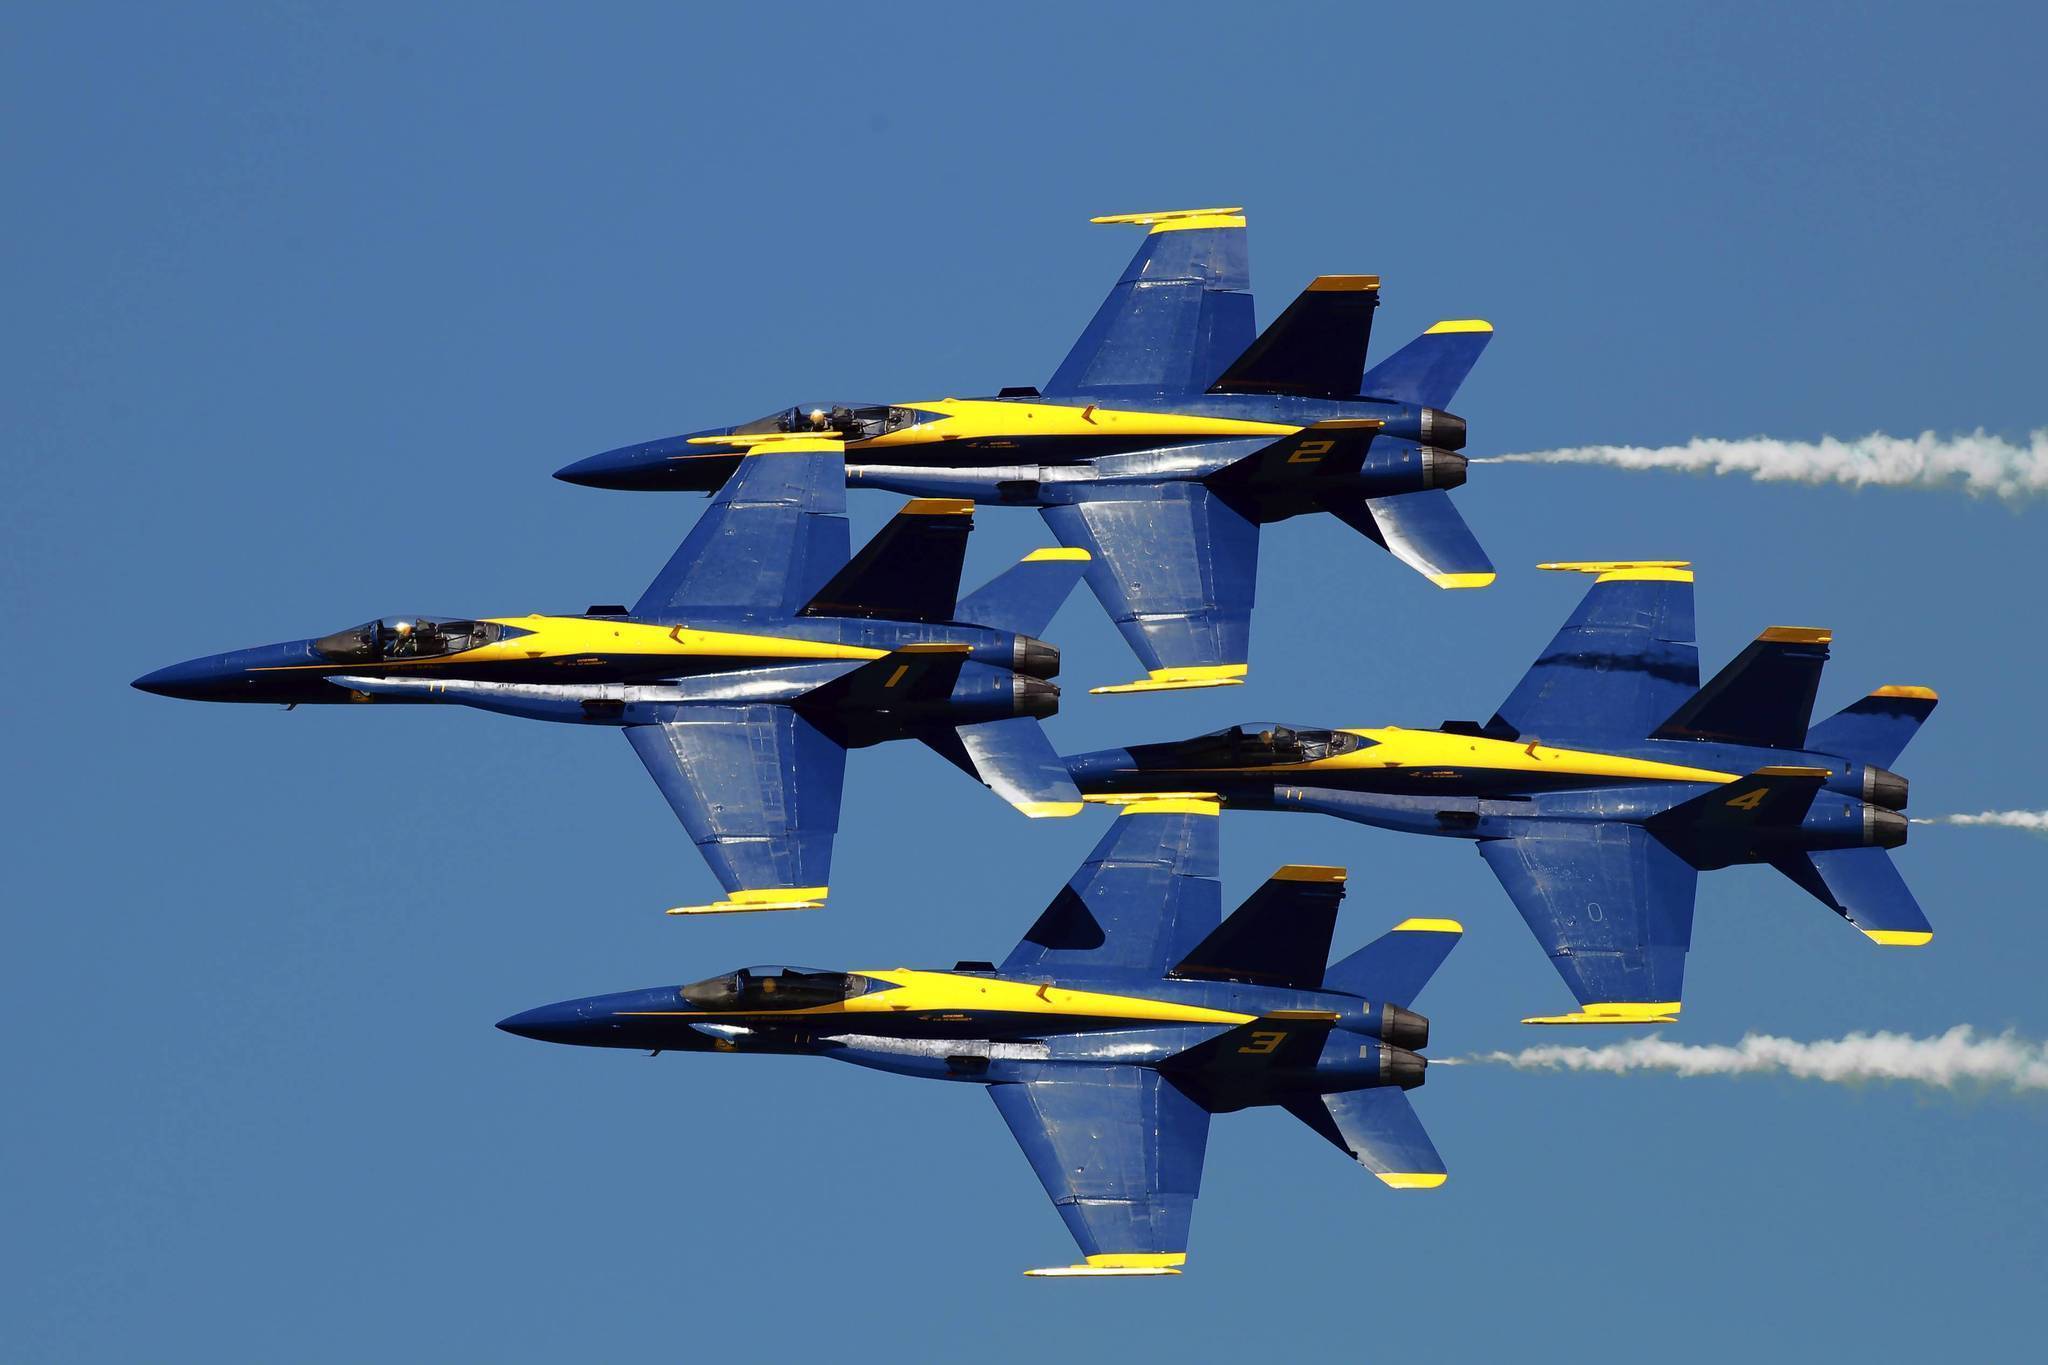 Blue Angels will fly over downtown Chicago - Chicago Tribune